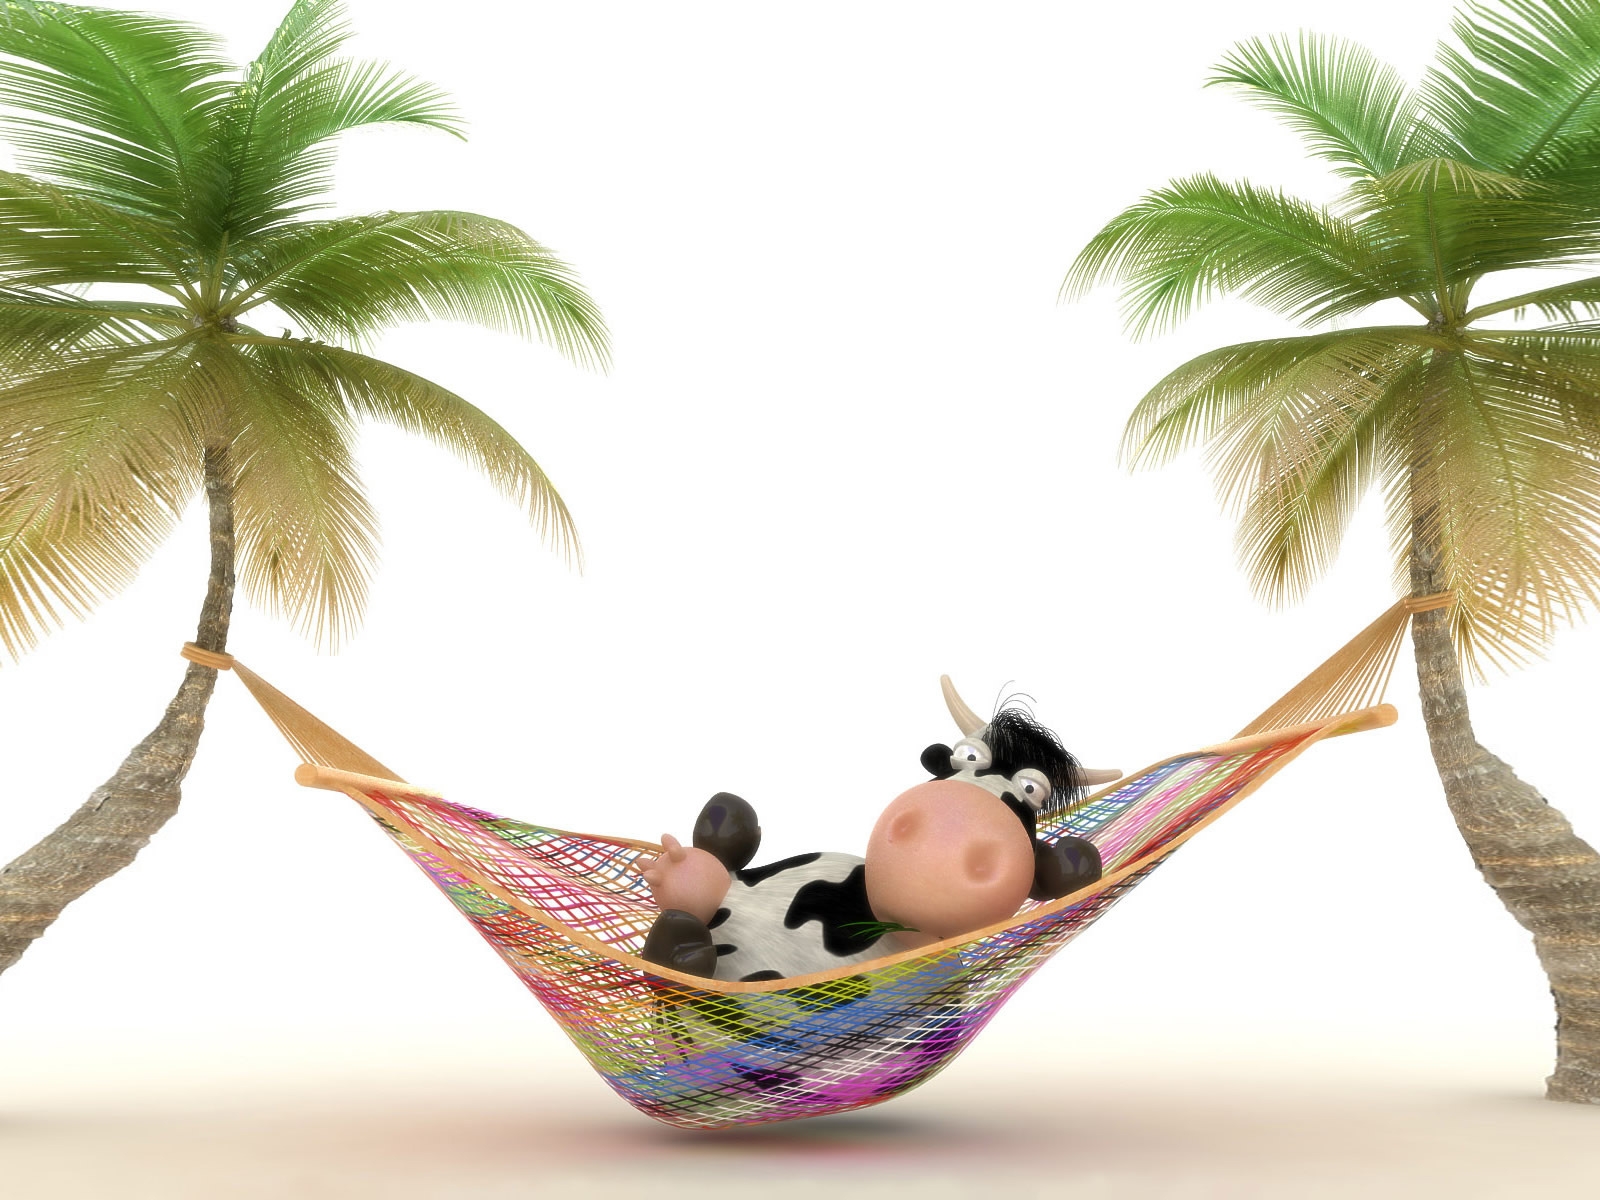 Cow relaxing in Hammock for 1600 x 1200 resolution